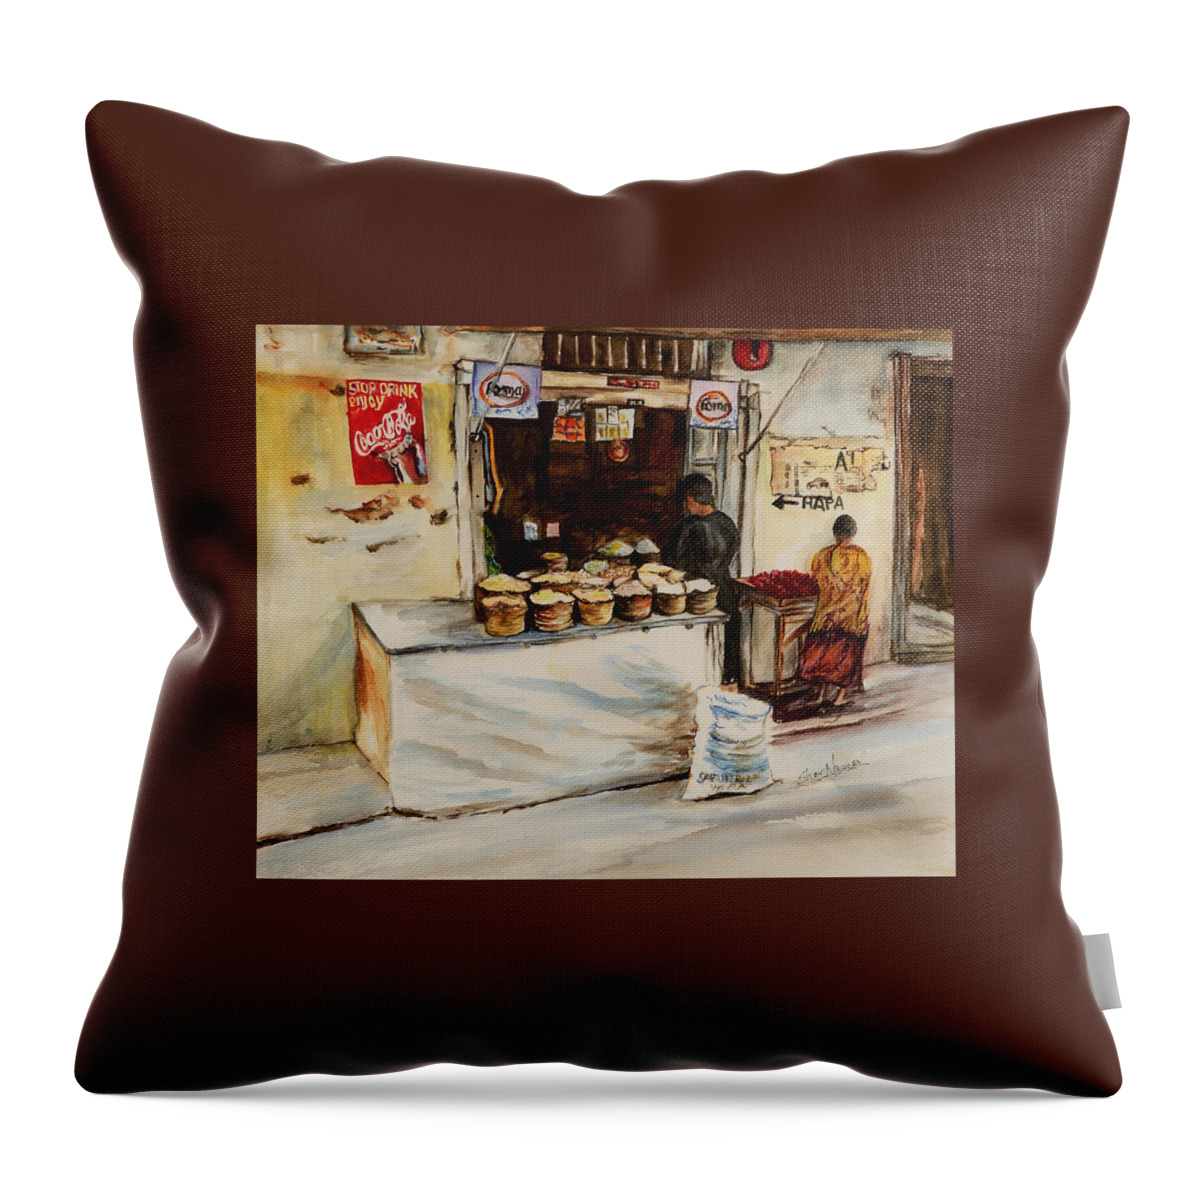 Duka African Store Throw Pillow featuring the painting African Corner Store by Sher Nasser Artist